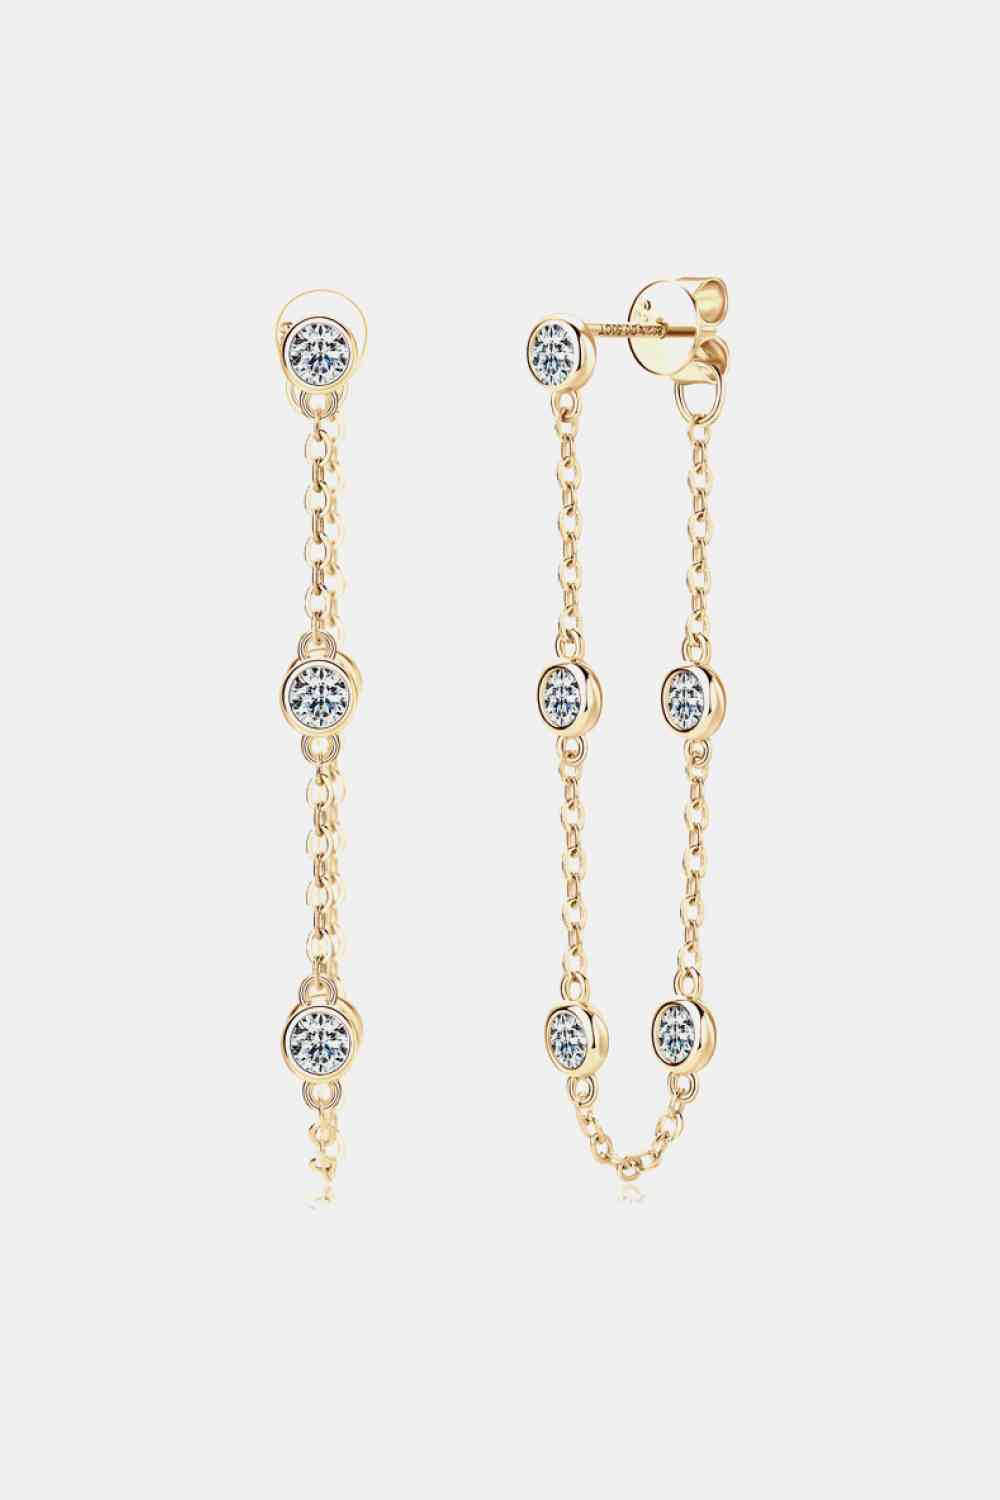 1 Carat Moissanite 925 Sterling Silver Chain Earrings - Shop Tophatter Deals, Electronics, Fashion, Jewelry, Health, Beauty, Home Decor, Free Shipping